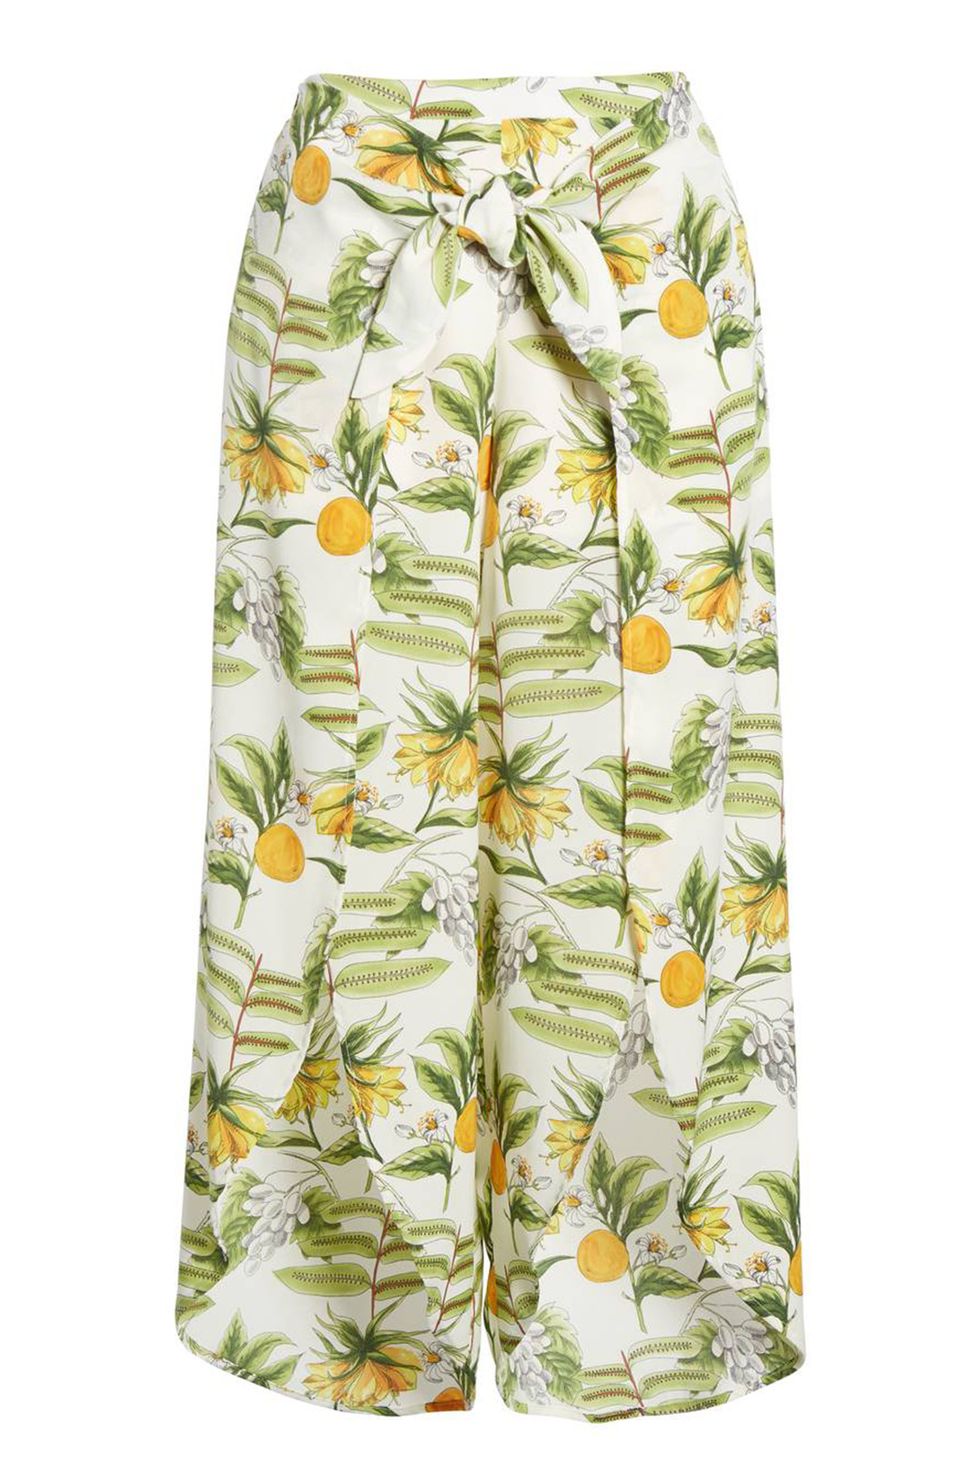 10 Culotte Pants to Wear in 2018 - The Best Summer Culottes to Update ...